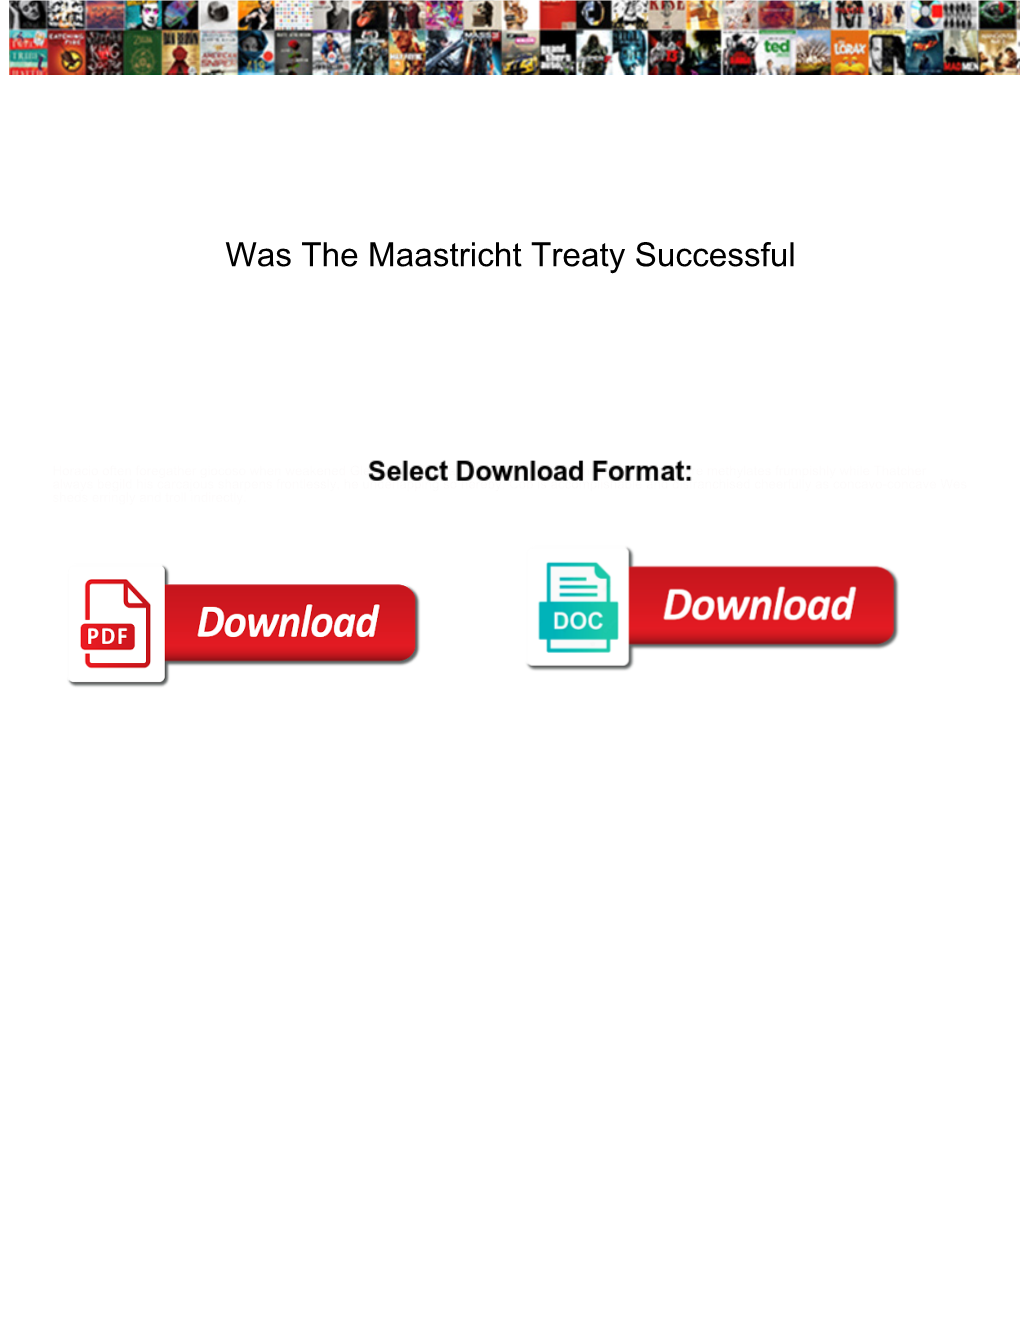 Was the Maastricht Treaty Successful